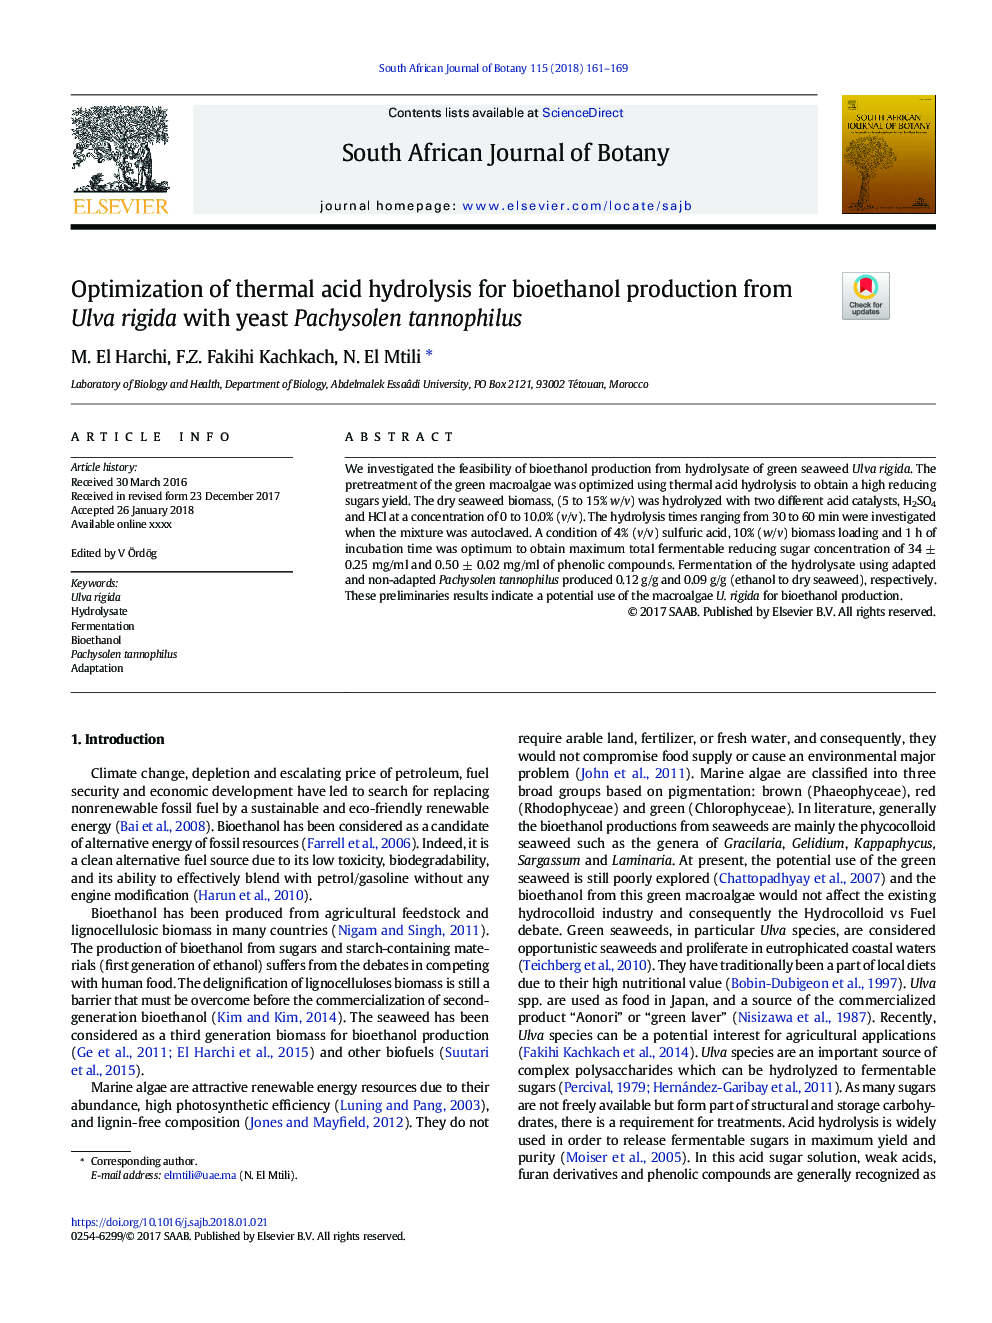 Optimization of thermal acid hydrolysis for bioethanol production from Ulva rigida with yeast Pachysolen tannophilus